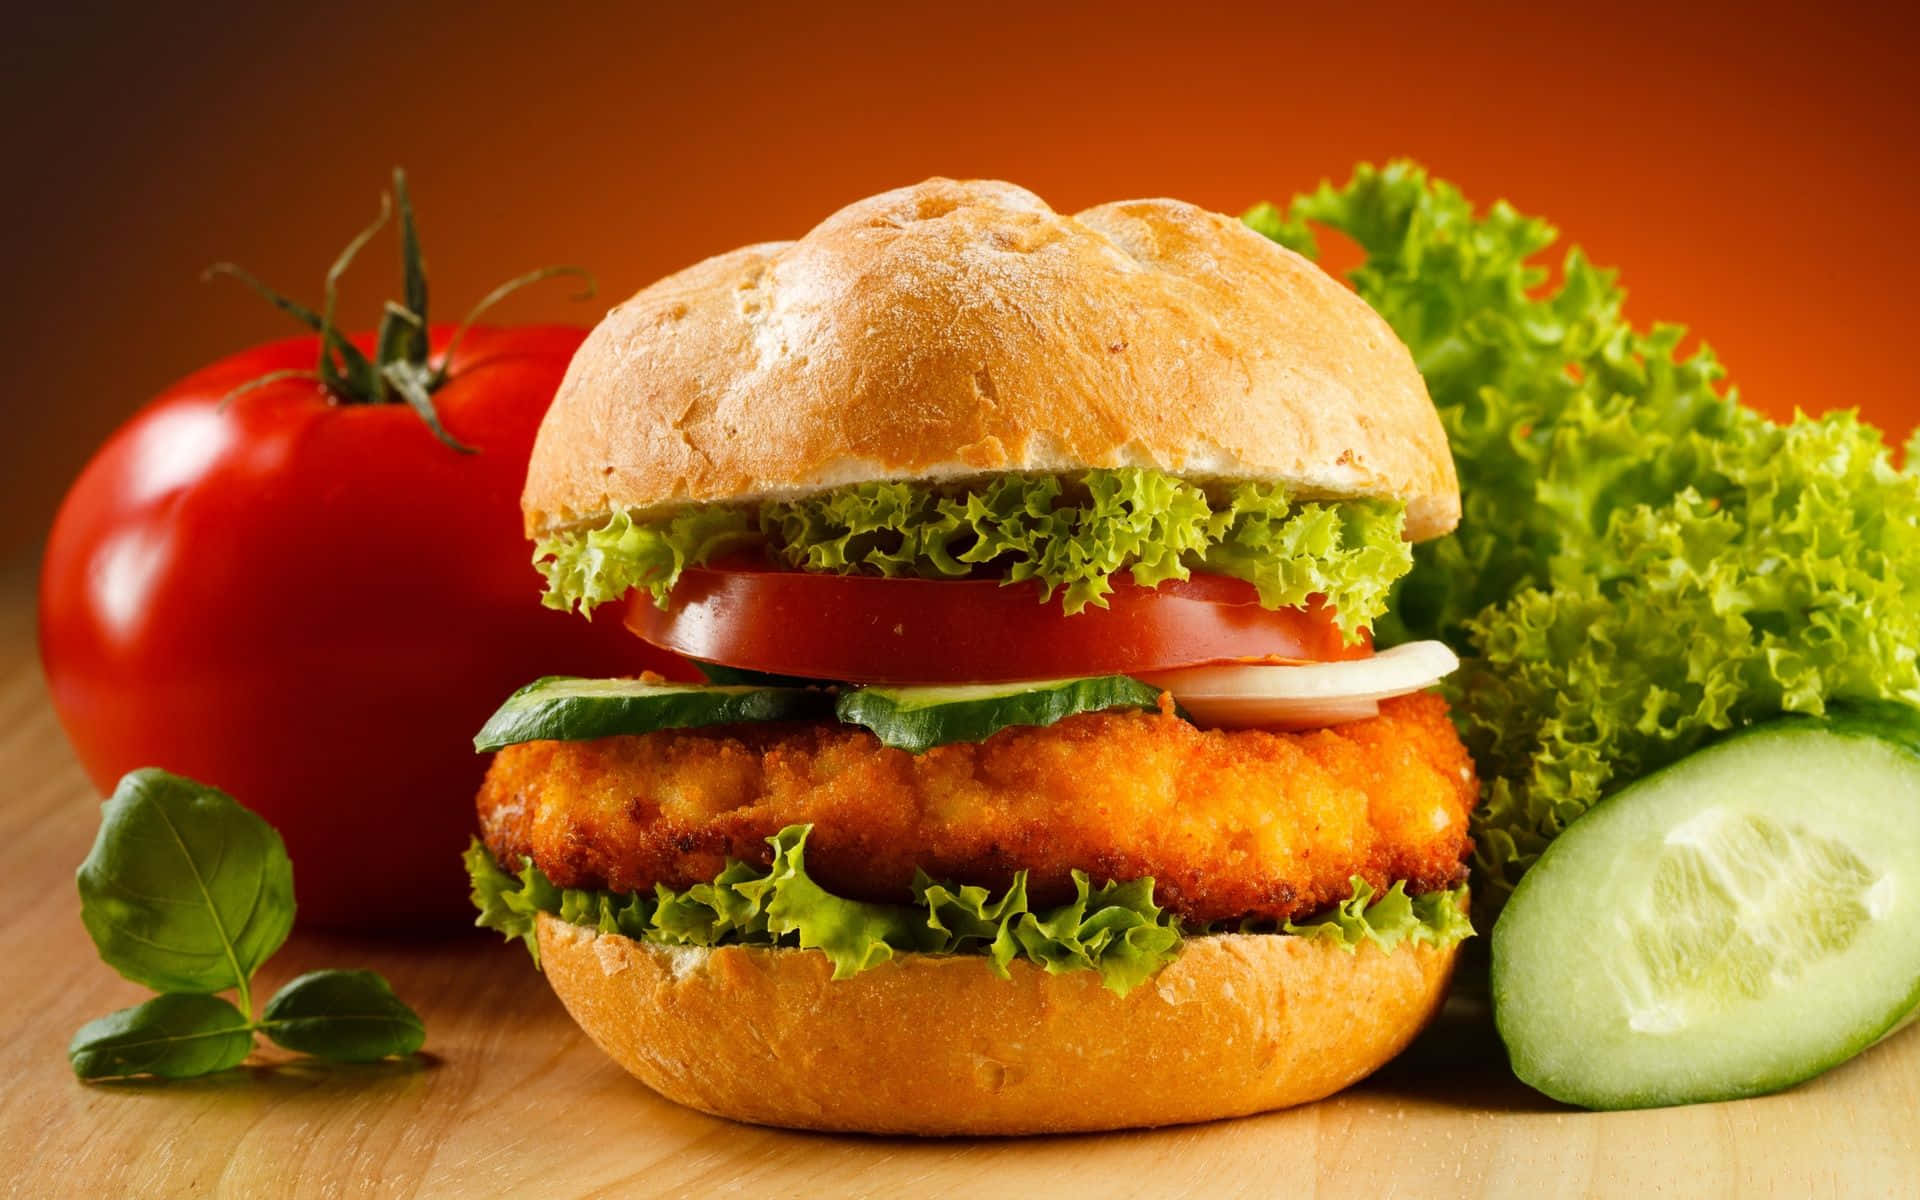 A Chicken Burger With Tomatoes, Lettuce And Cucumbers